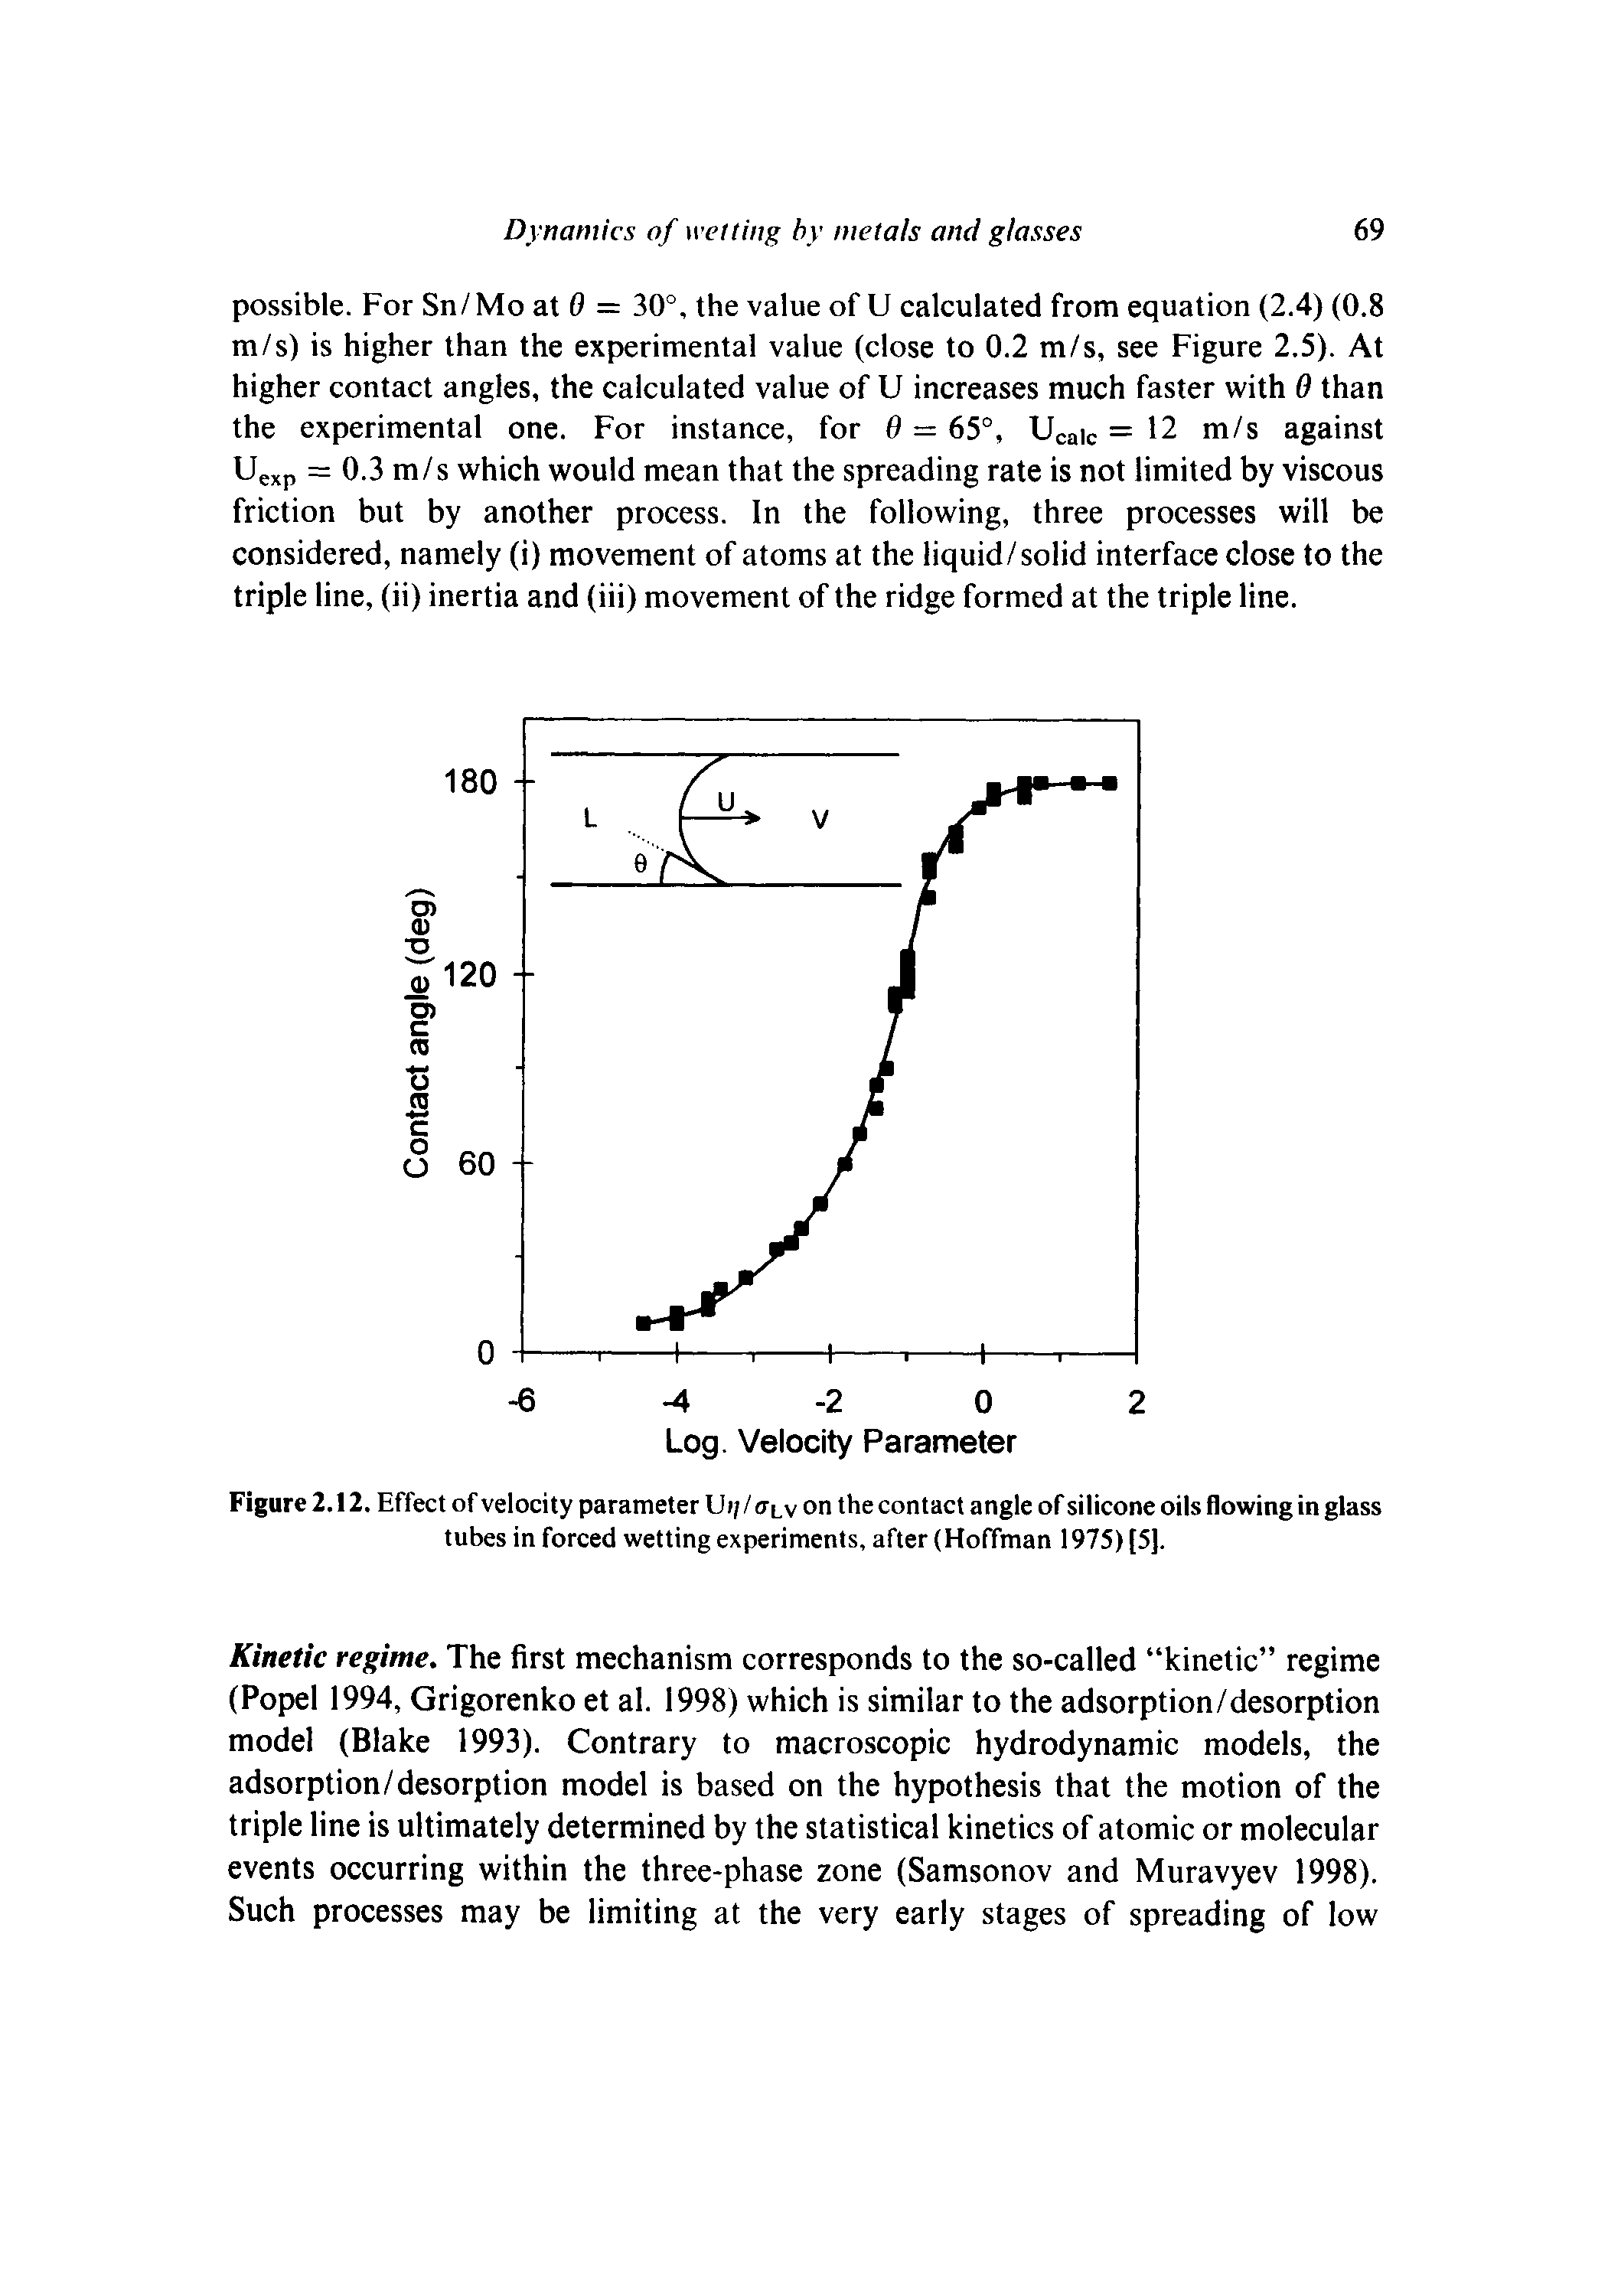 Figure 2.12. Effect of velocity parameter Ui / <j-Lv on the contact angle of silicone oils flowing in glass tubes in forced wetting experiments, after (Hoffman 1975) [5].